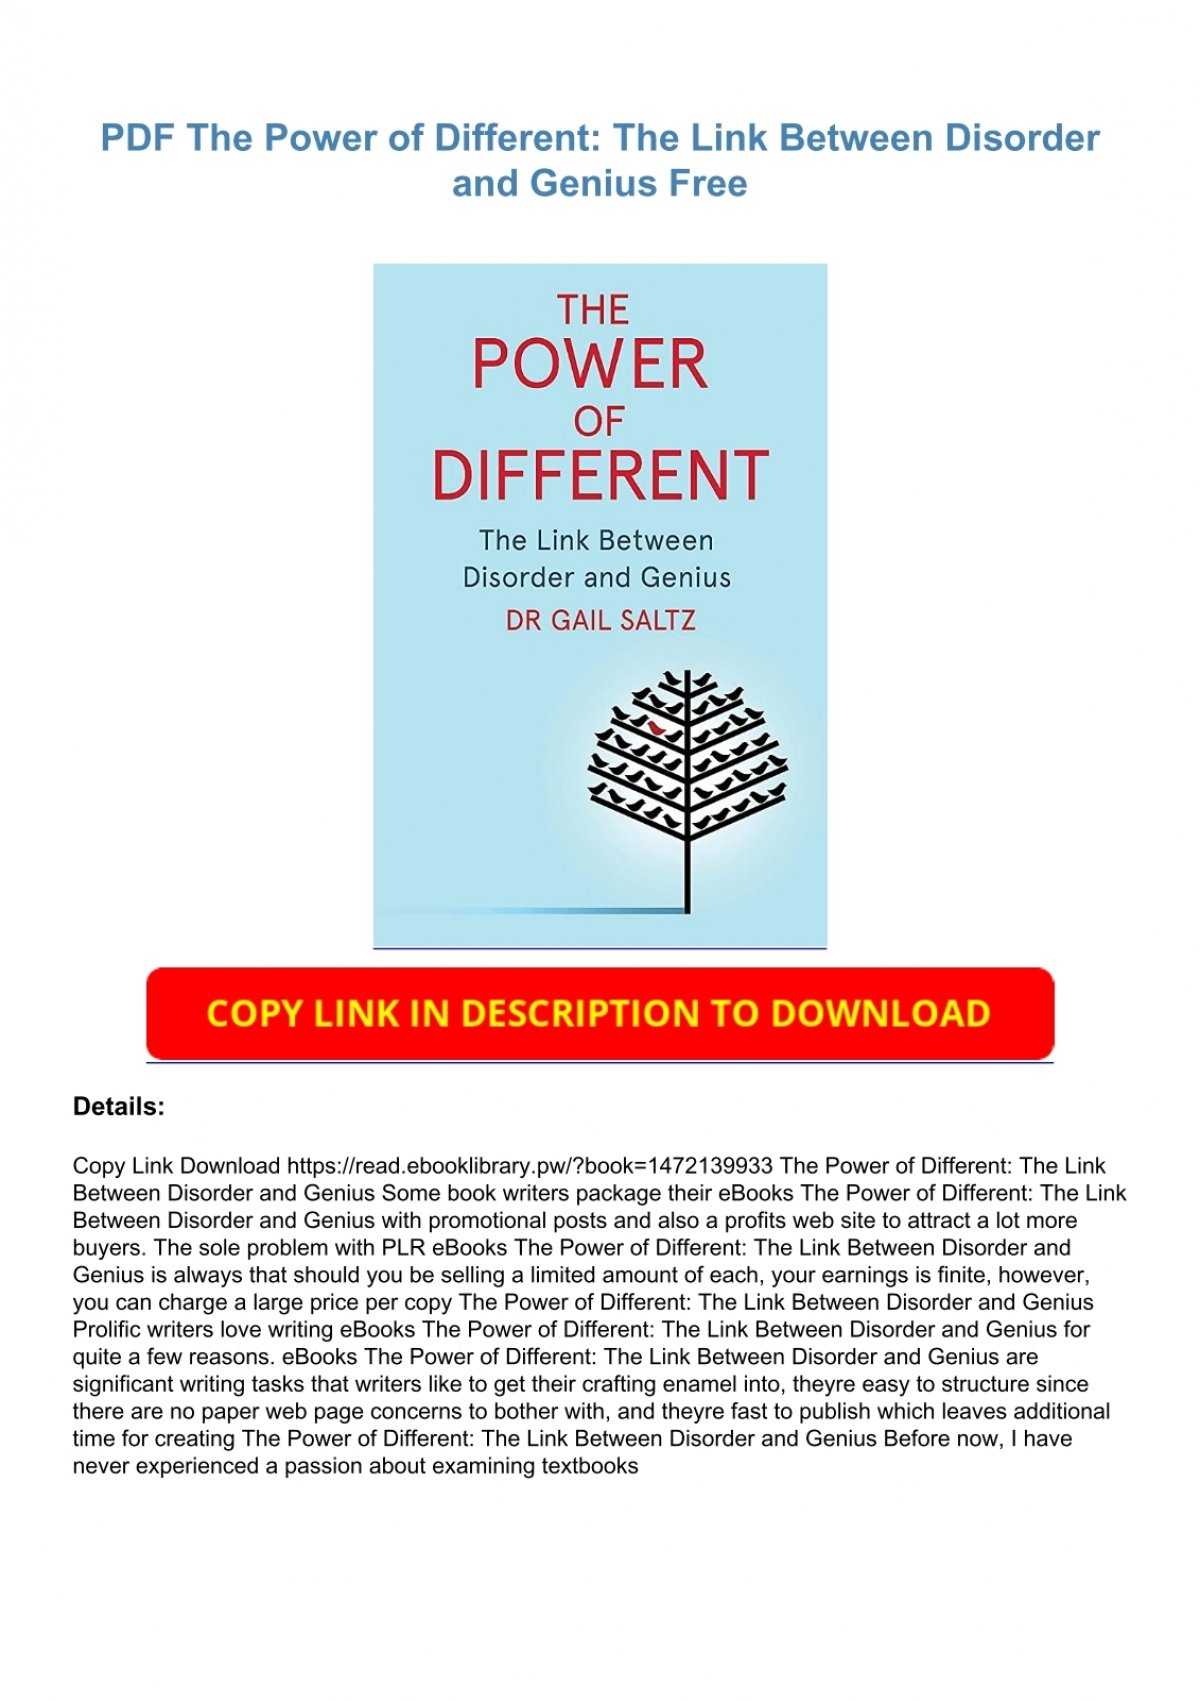 PDF The Power of Different: The Link Between Disorder and Genius Free